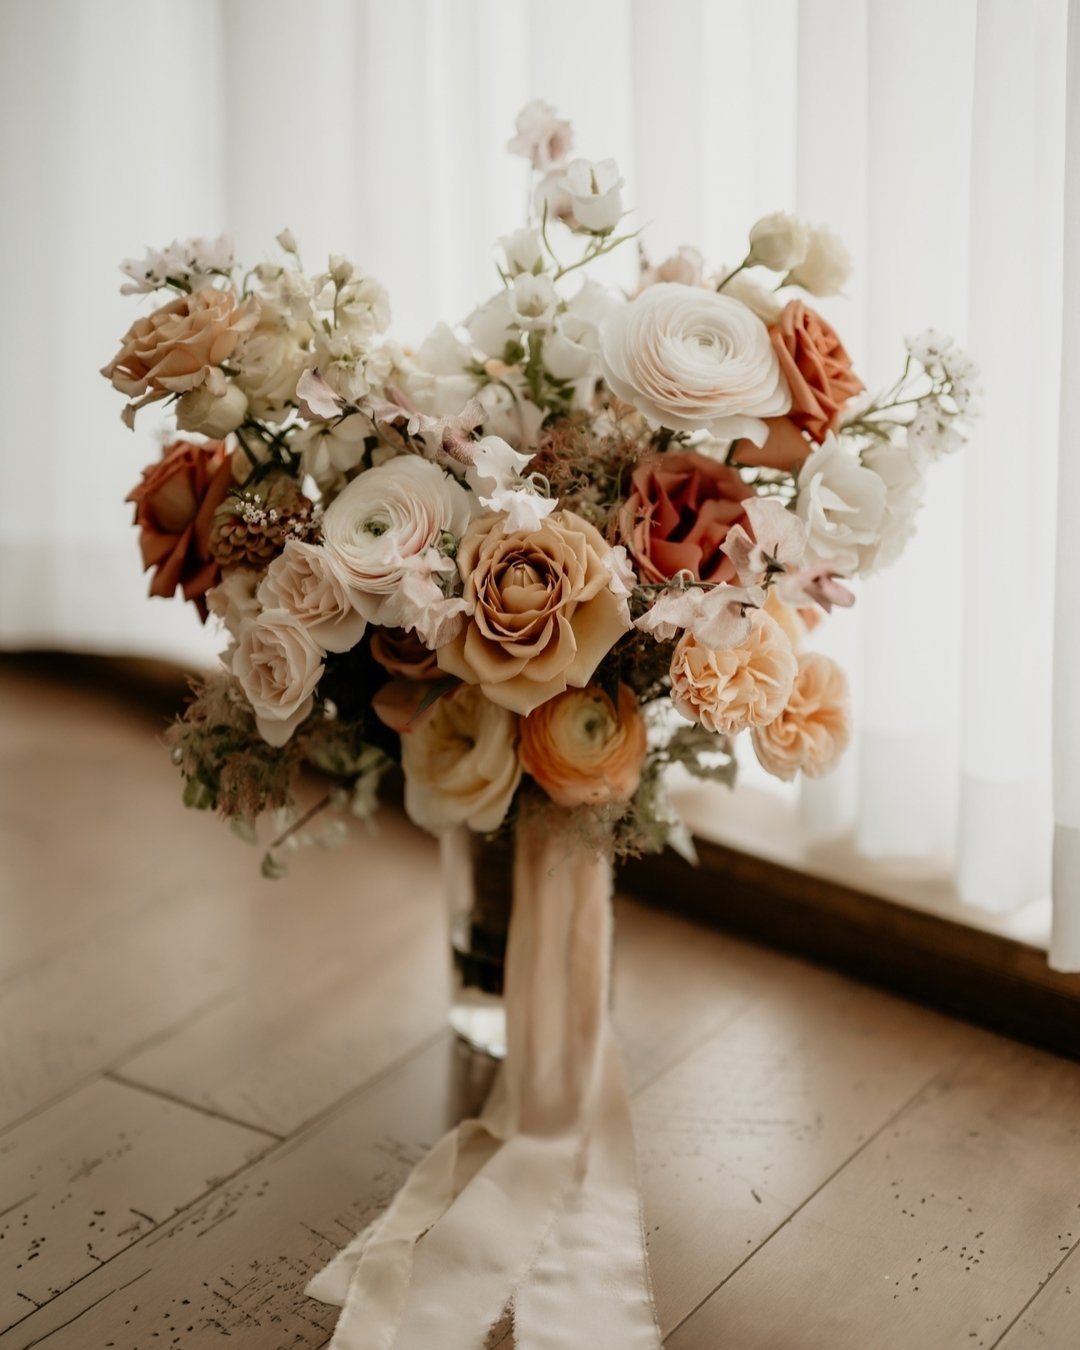 @ForeverWildfield always designs the most classic romantic bouquets with a bit of a twist. I loved this one from last summer with these honey-terracotta roses and peachy rancunculus. 

Photography @jeffshuh
Florals @foreverwildfield
.
.
.
#BridalBouq